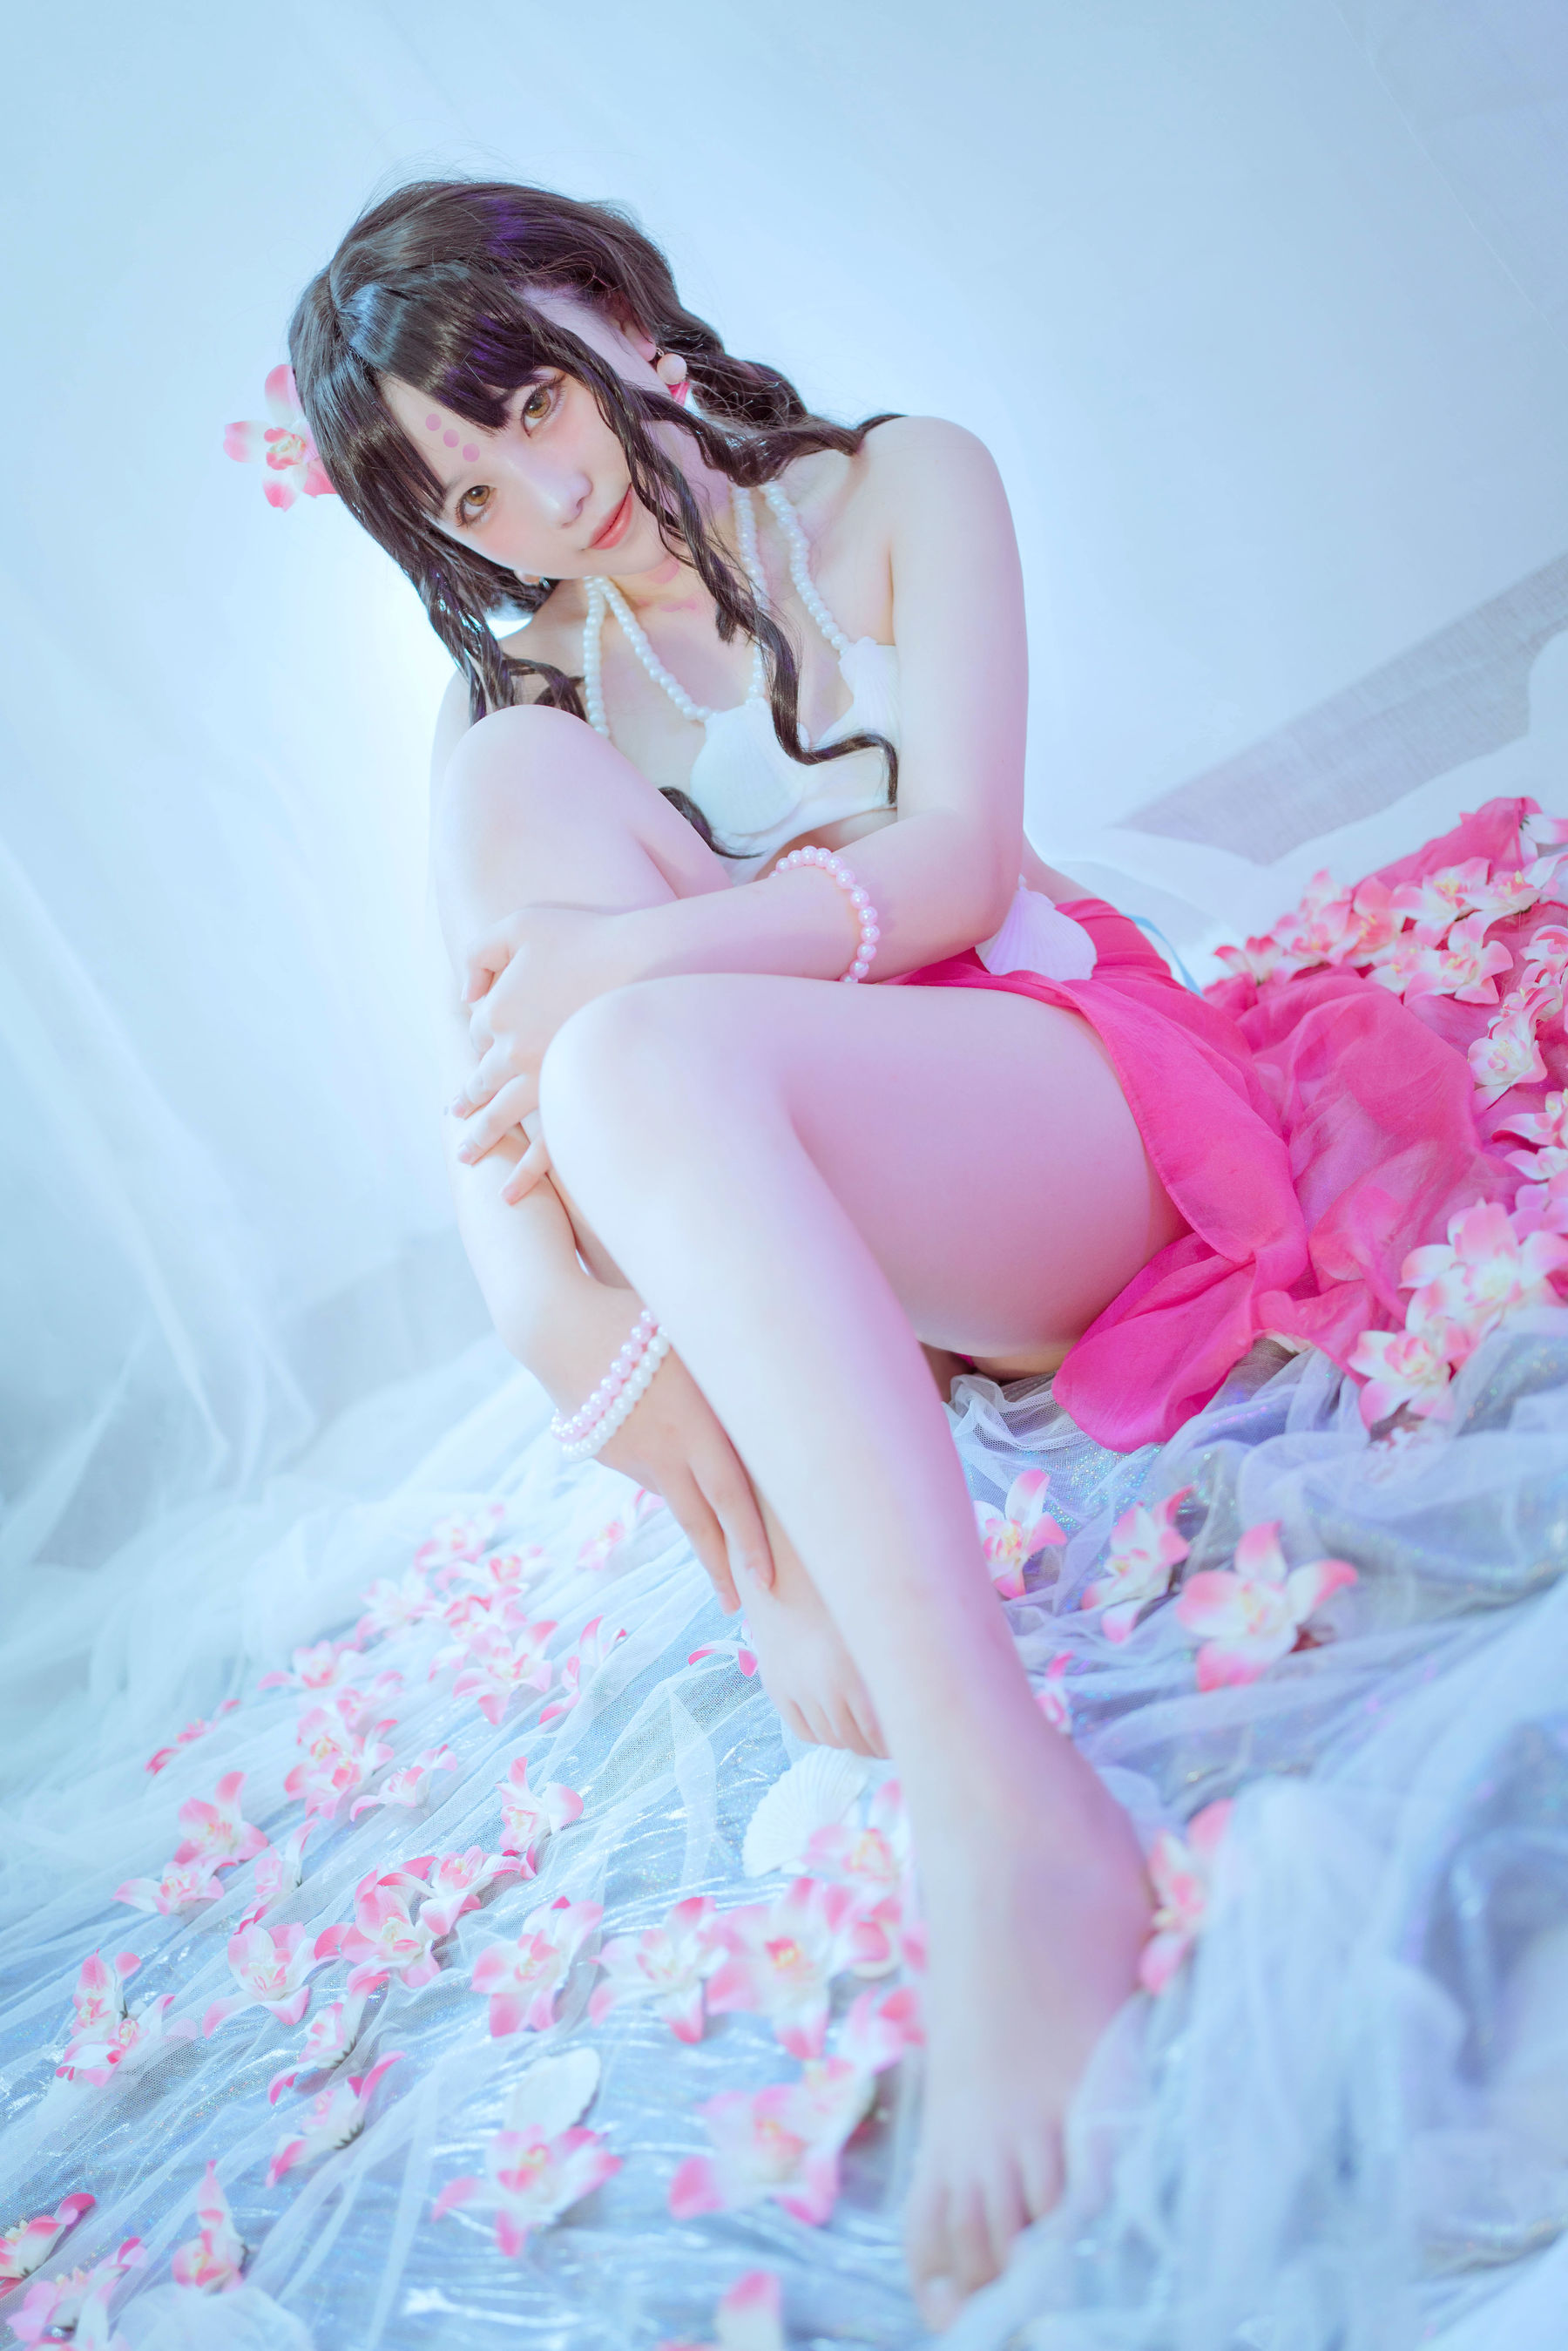 [COS Welfare] Ah Ban is very happy today – Shasheng Academy Photo Set